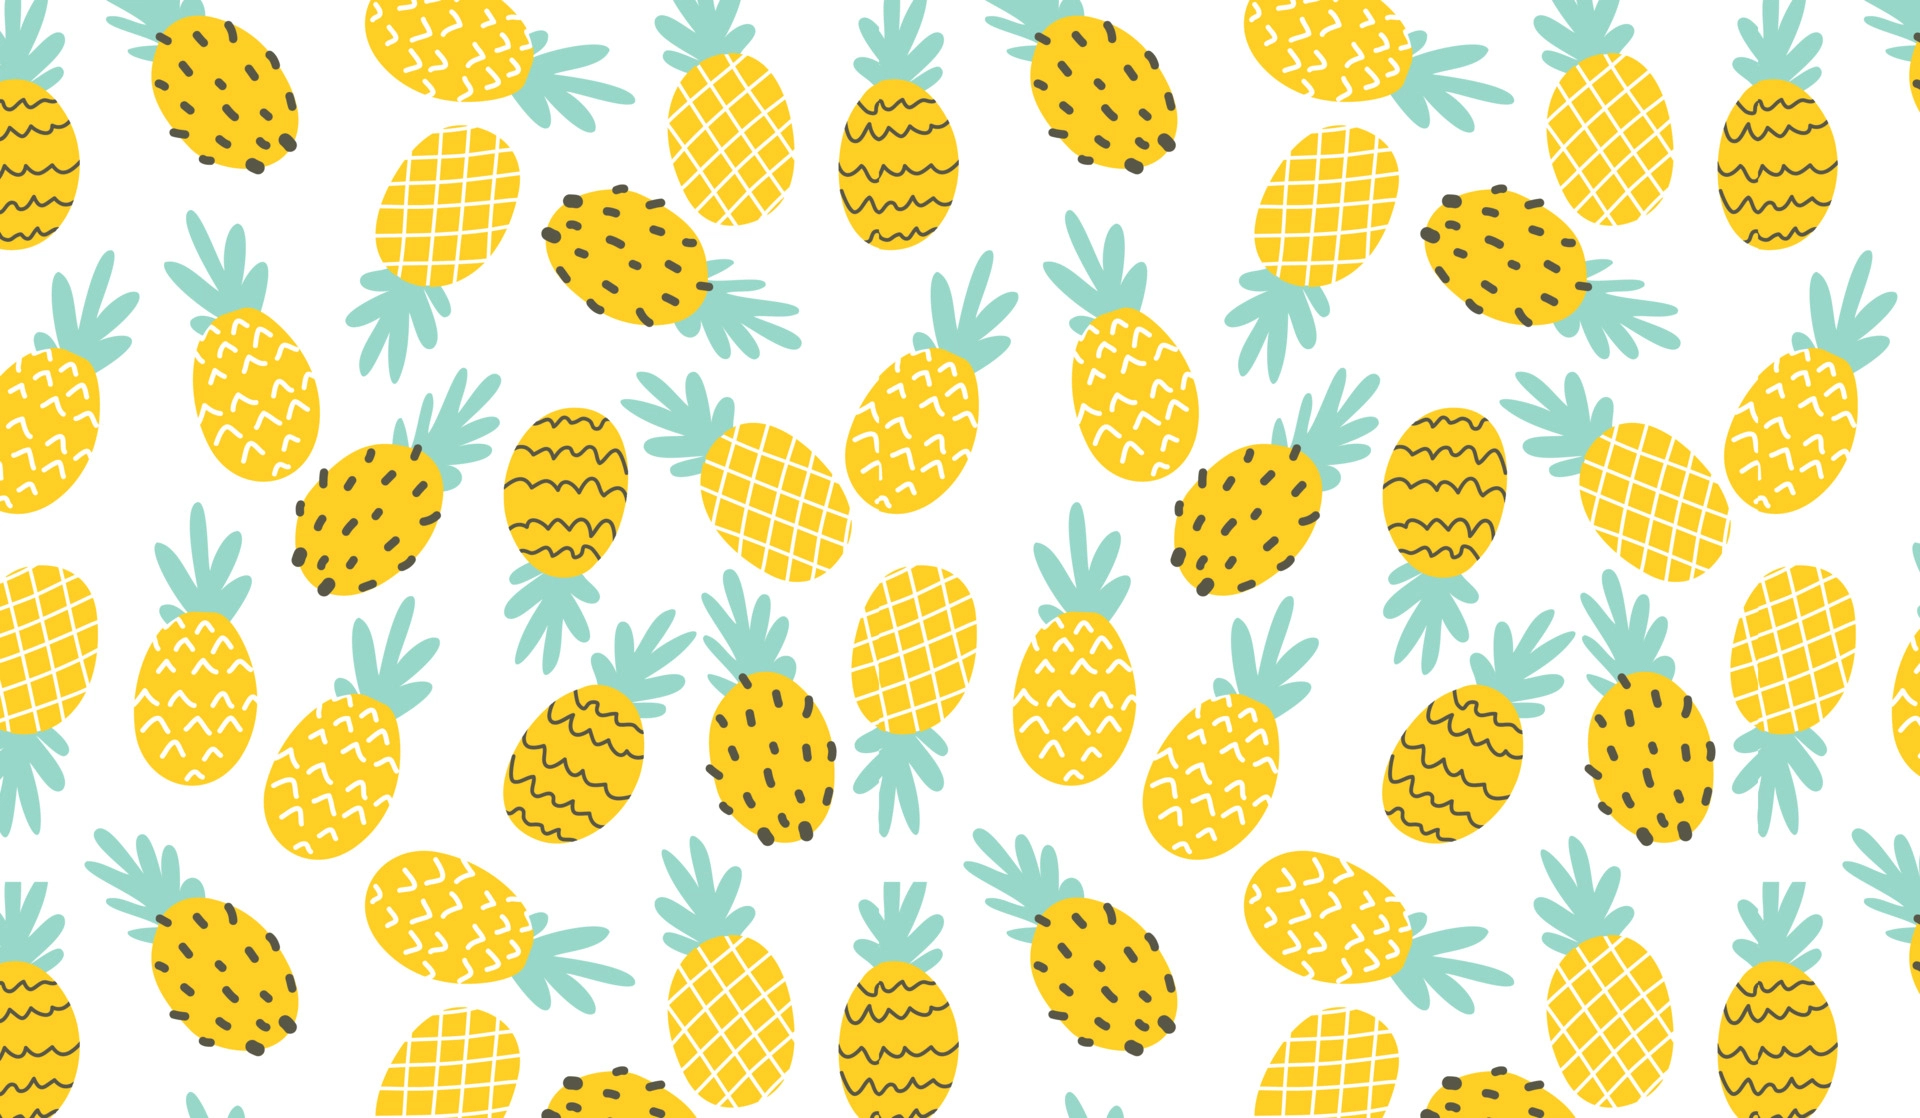 1920x1118 Ripe Yellow Pineapple Wallpaper For Phone. Pineapple Vector Illustration Pattern On Isolated White Background. 3584336 Vector Art